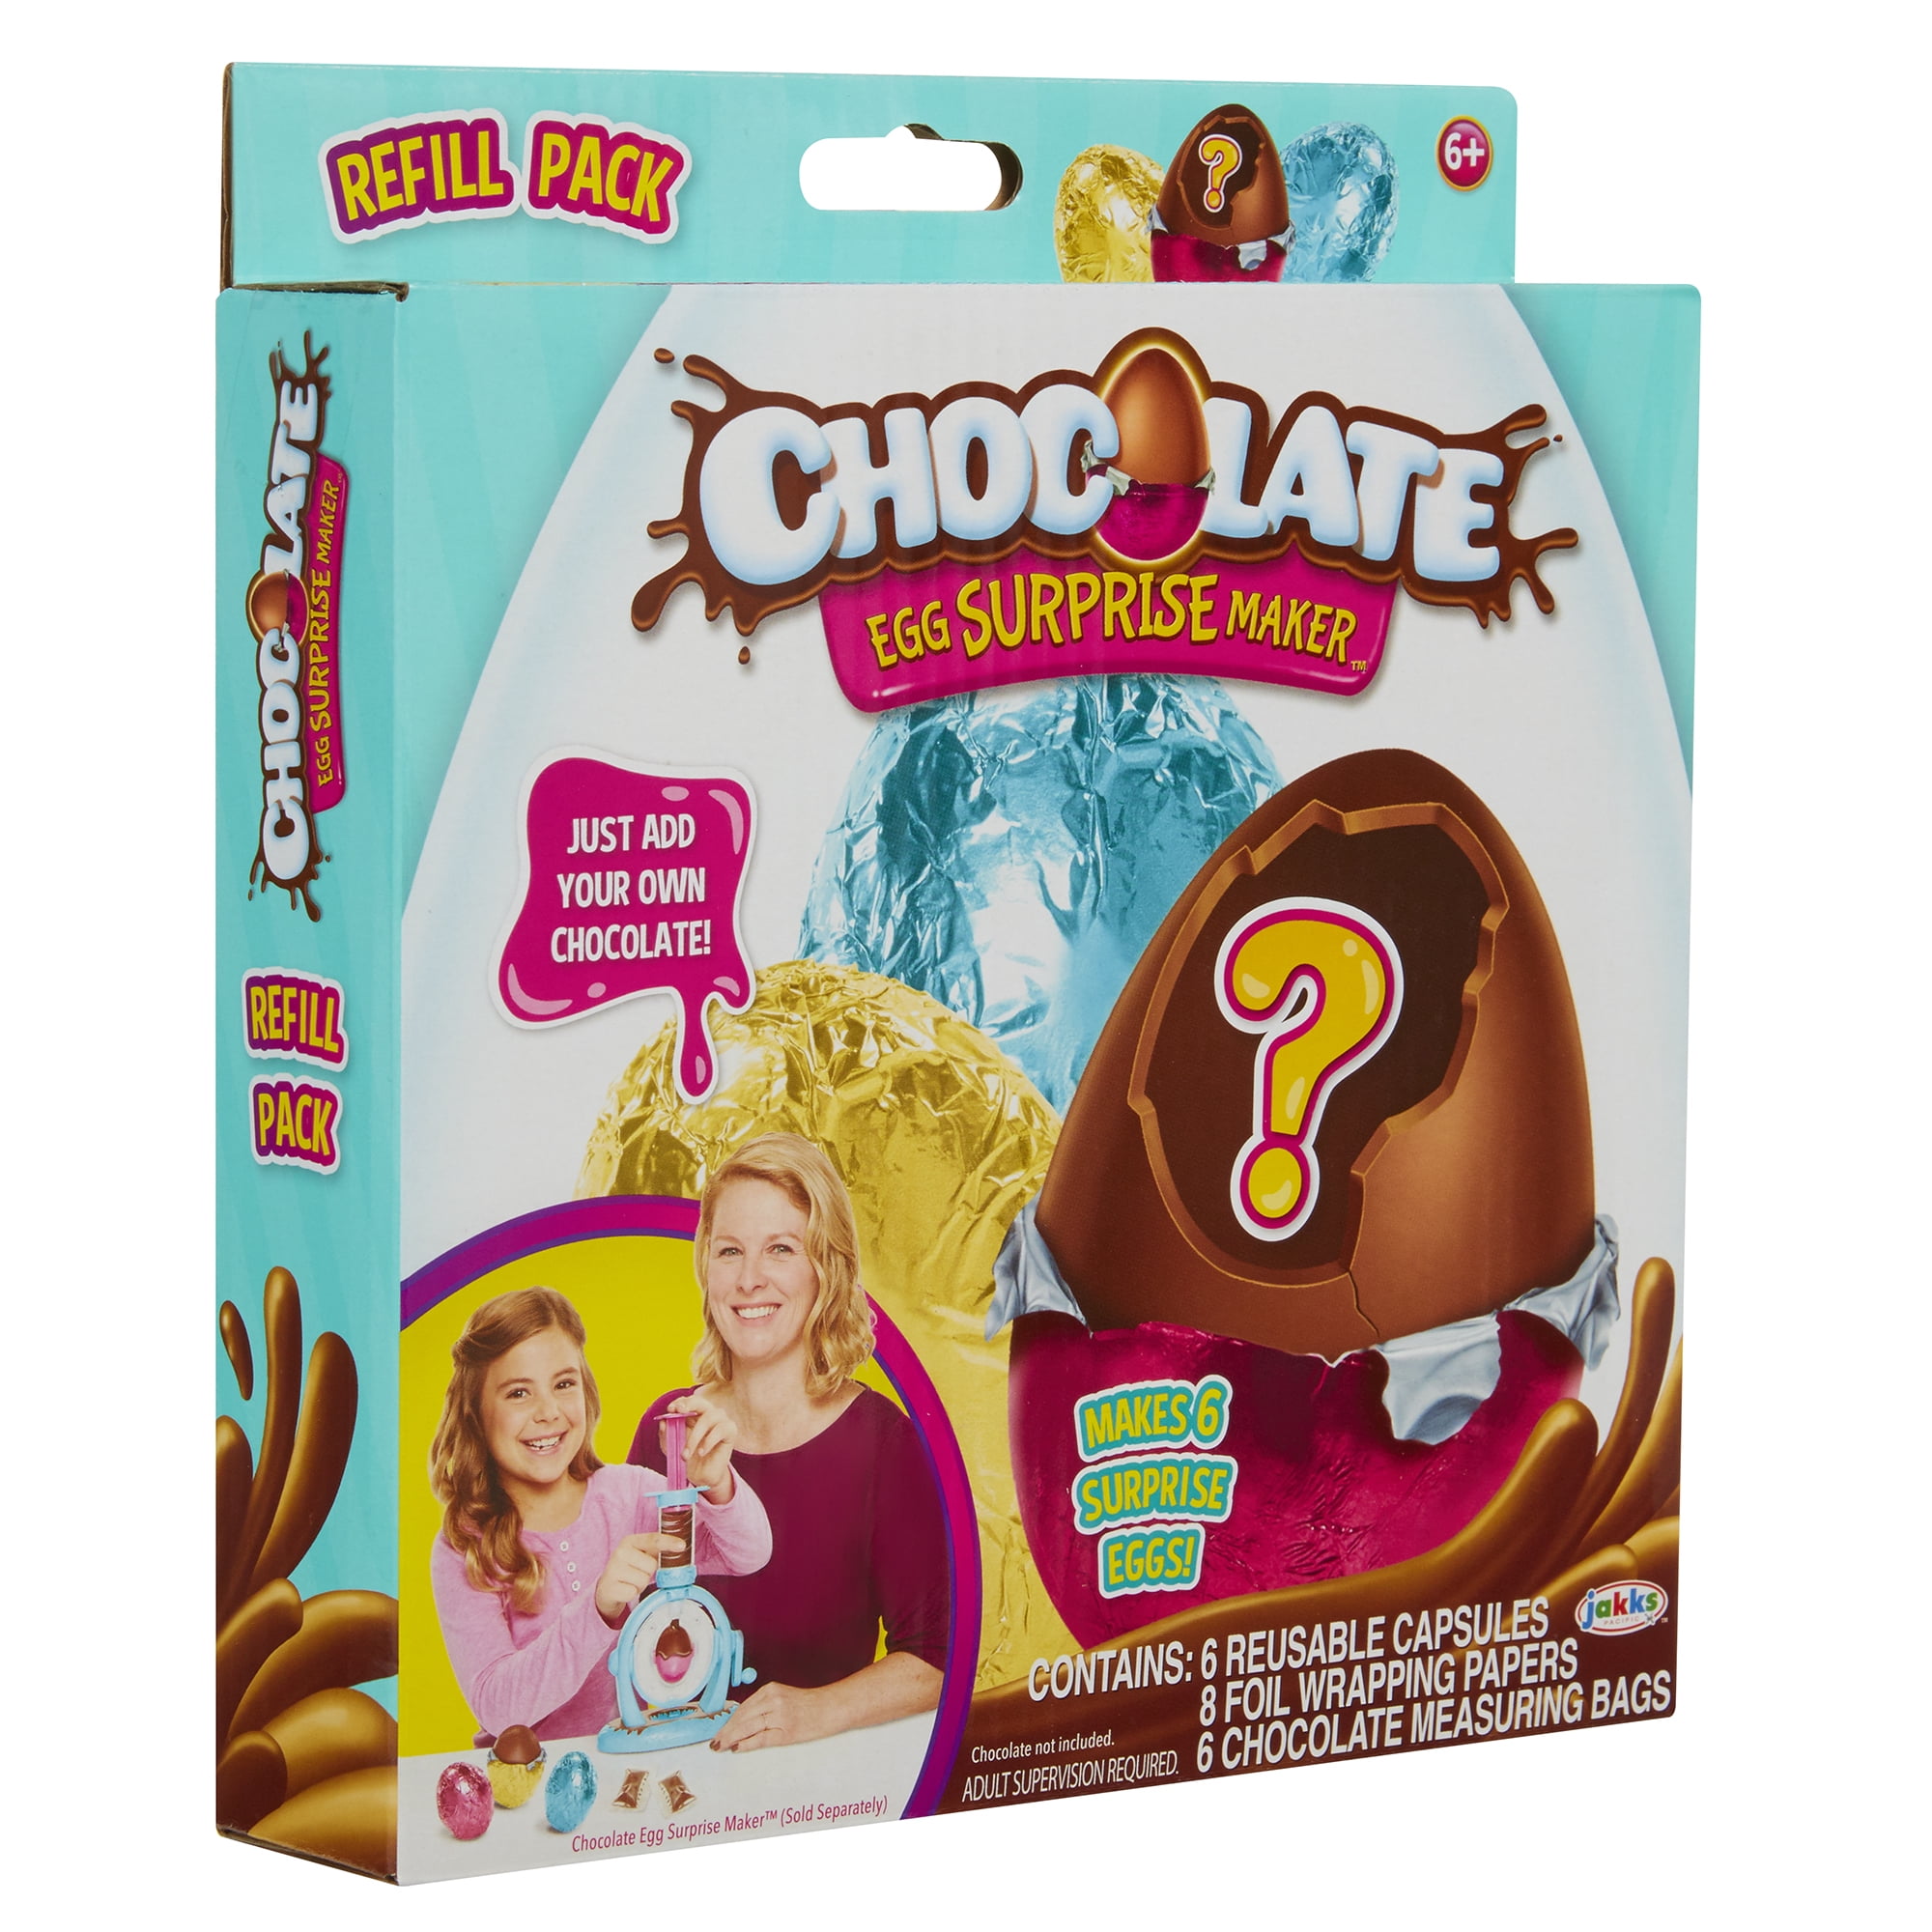 Details about   Chocolate Egg Surprise Chocolate Egg Surprise Maker 